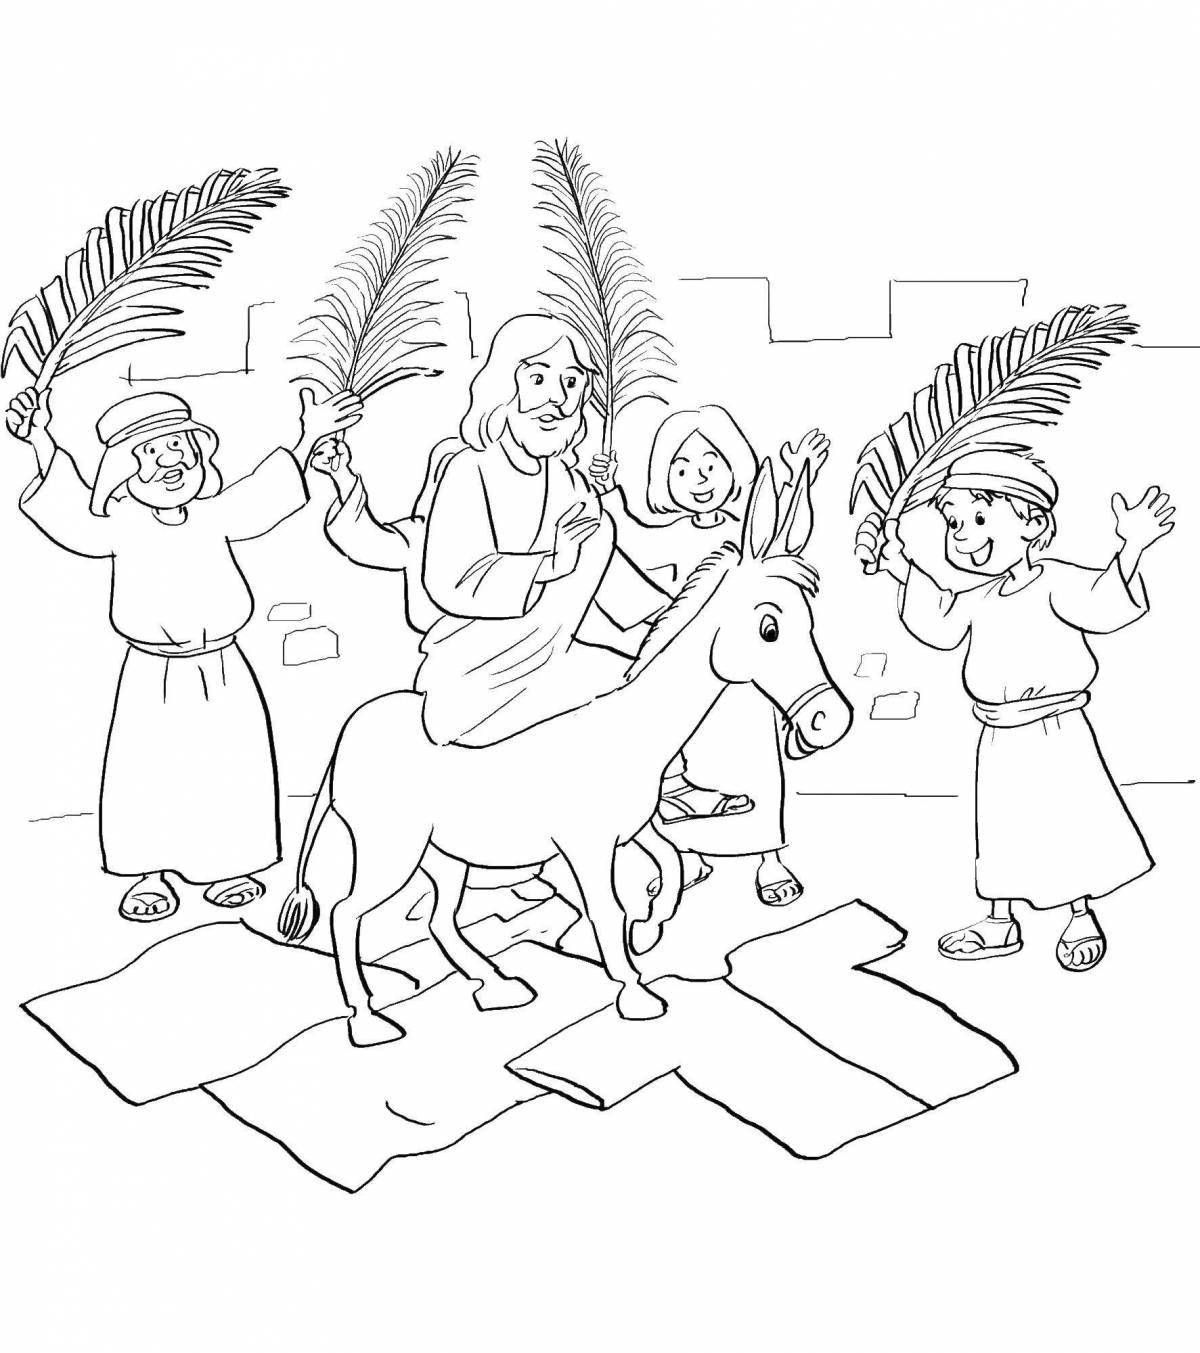 Shiny Sunday School coloring page